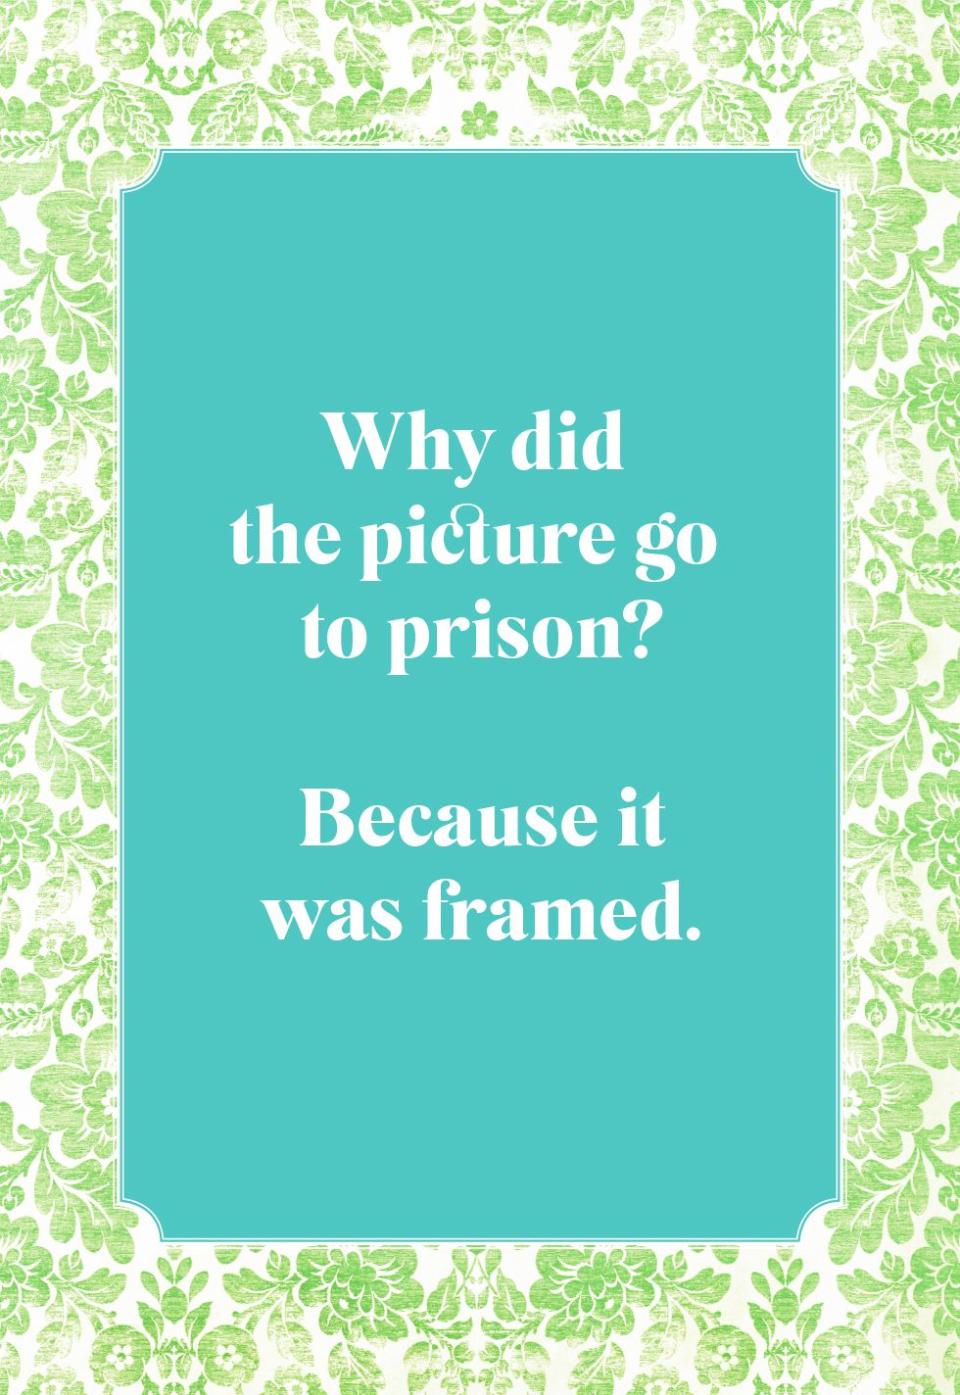 Why did the picture go to prison?